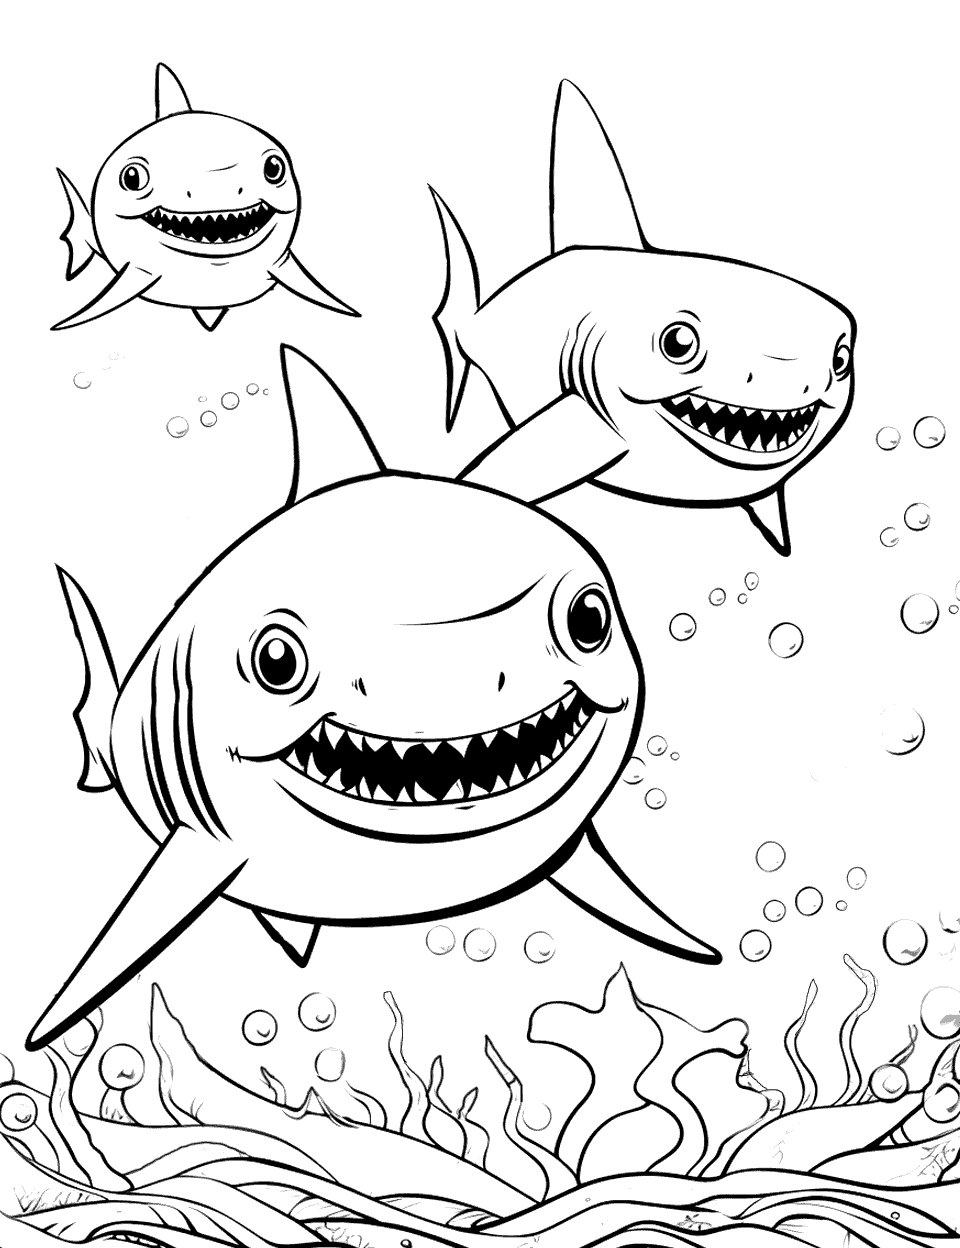 Multiple Baby Sharks Shark Coloring Page - A group of Baby Sharks playing tag in the sea.